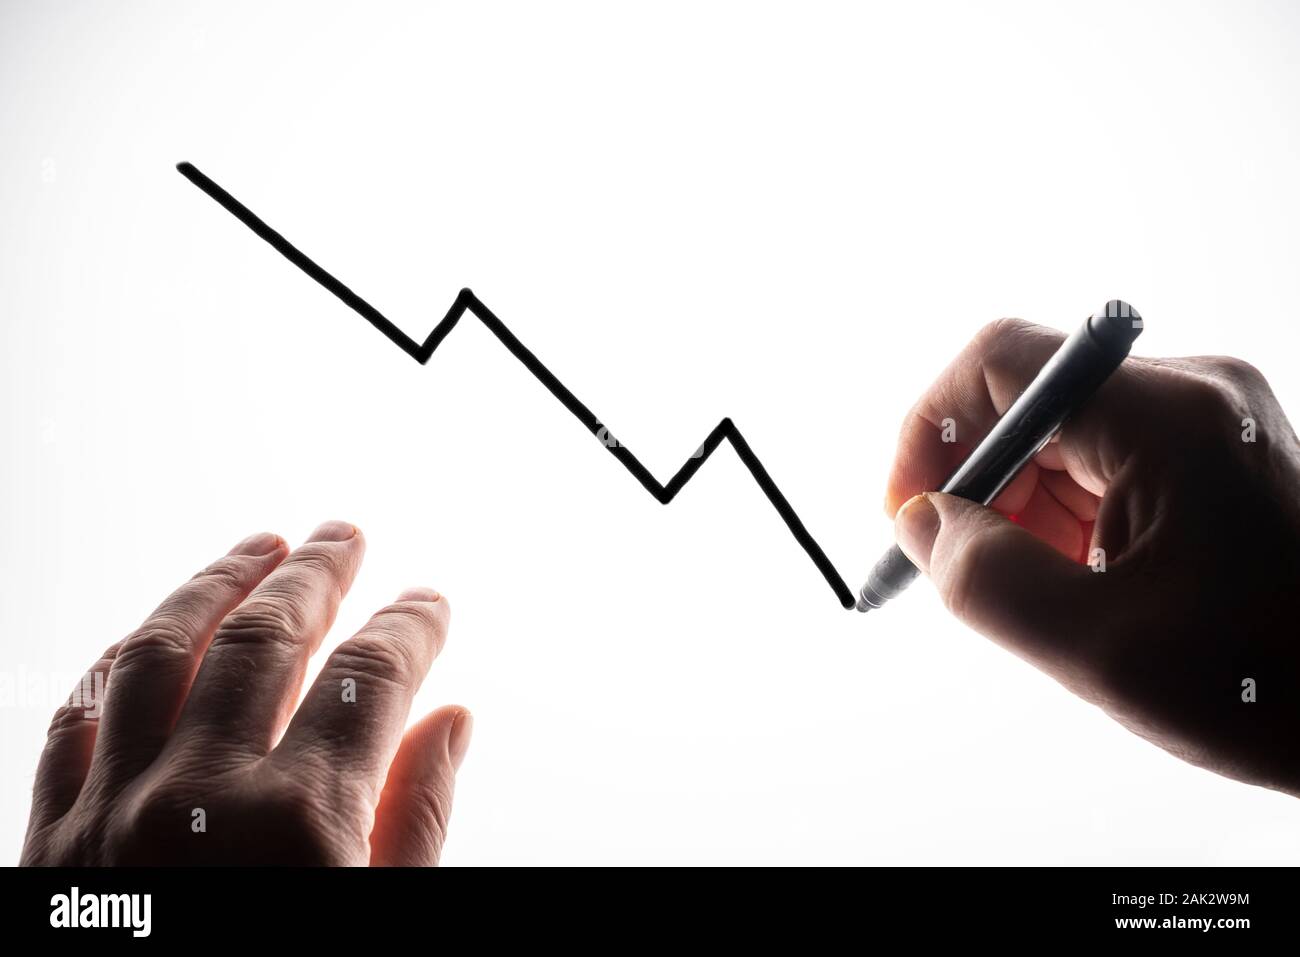 the trend graph drawn on a backlit surface Stock Photo